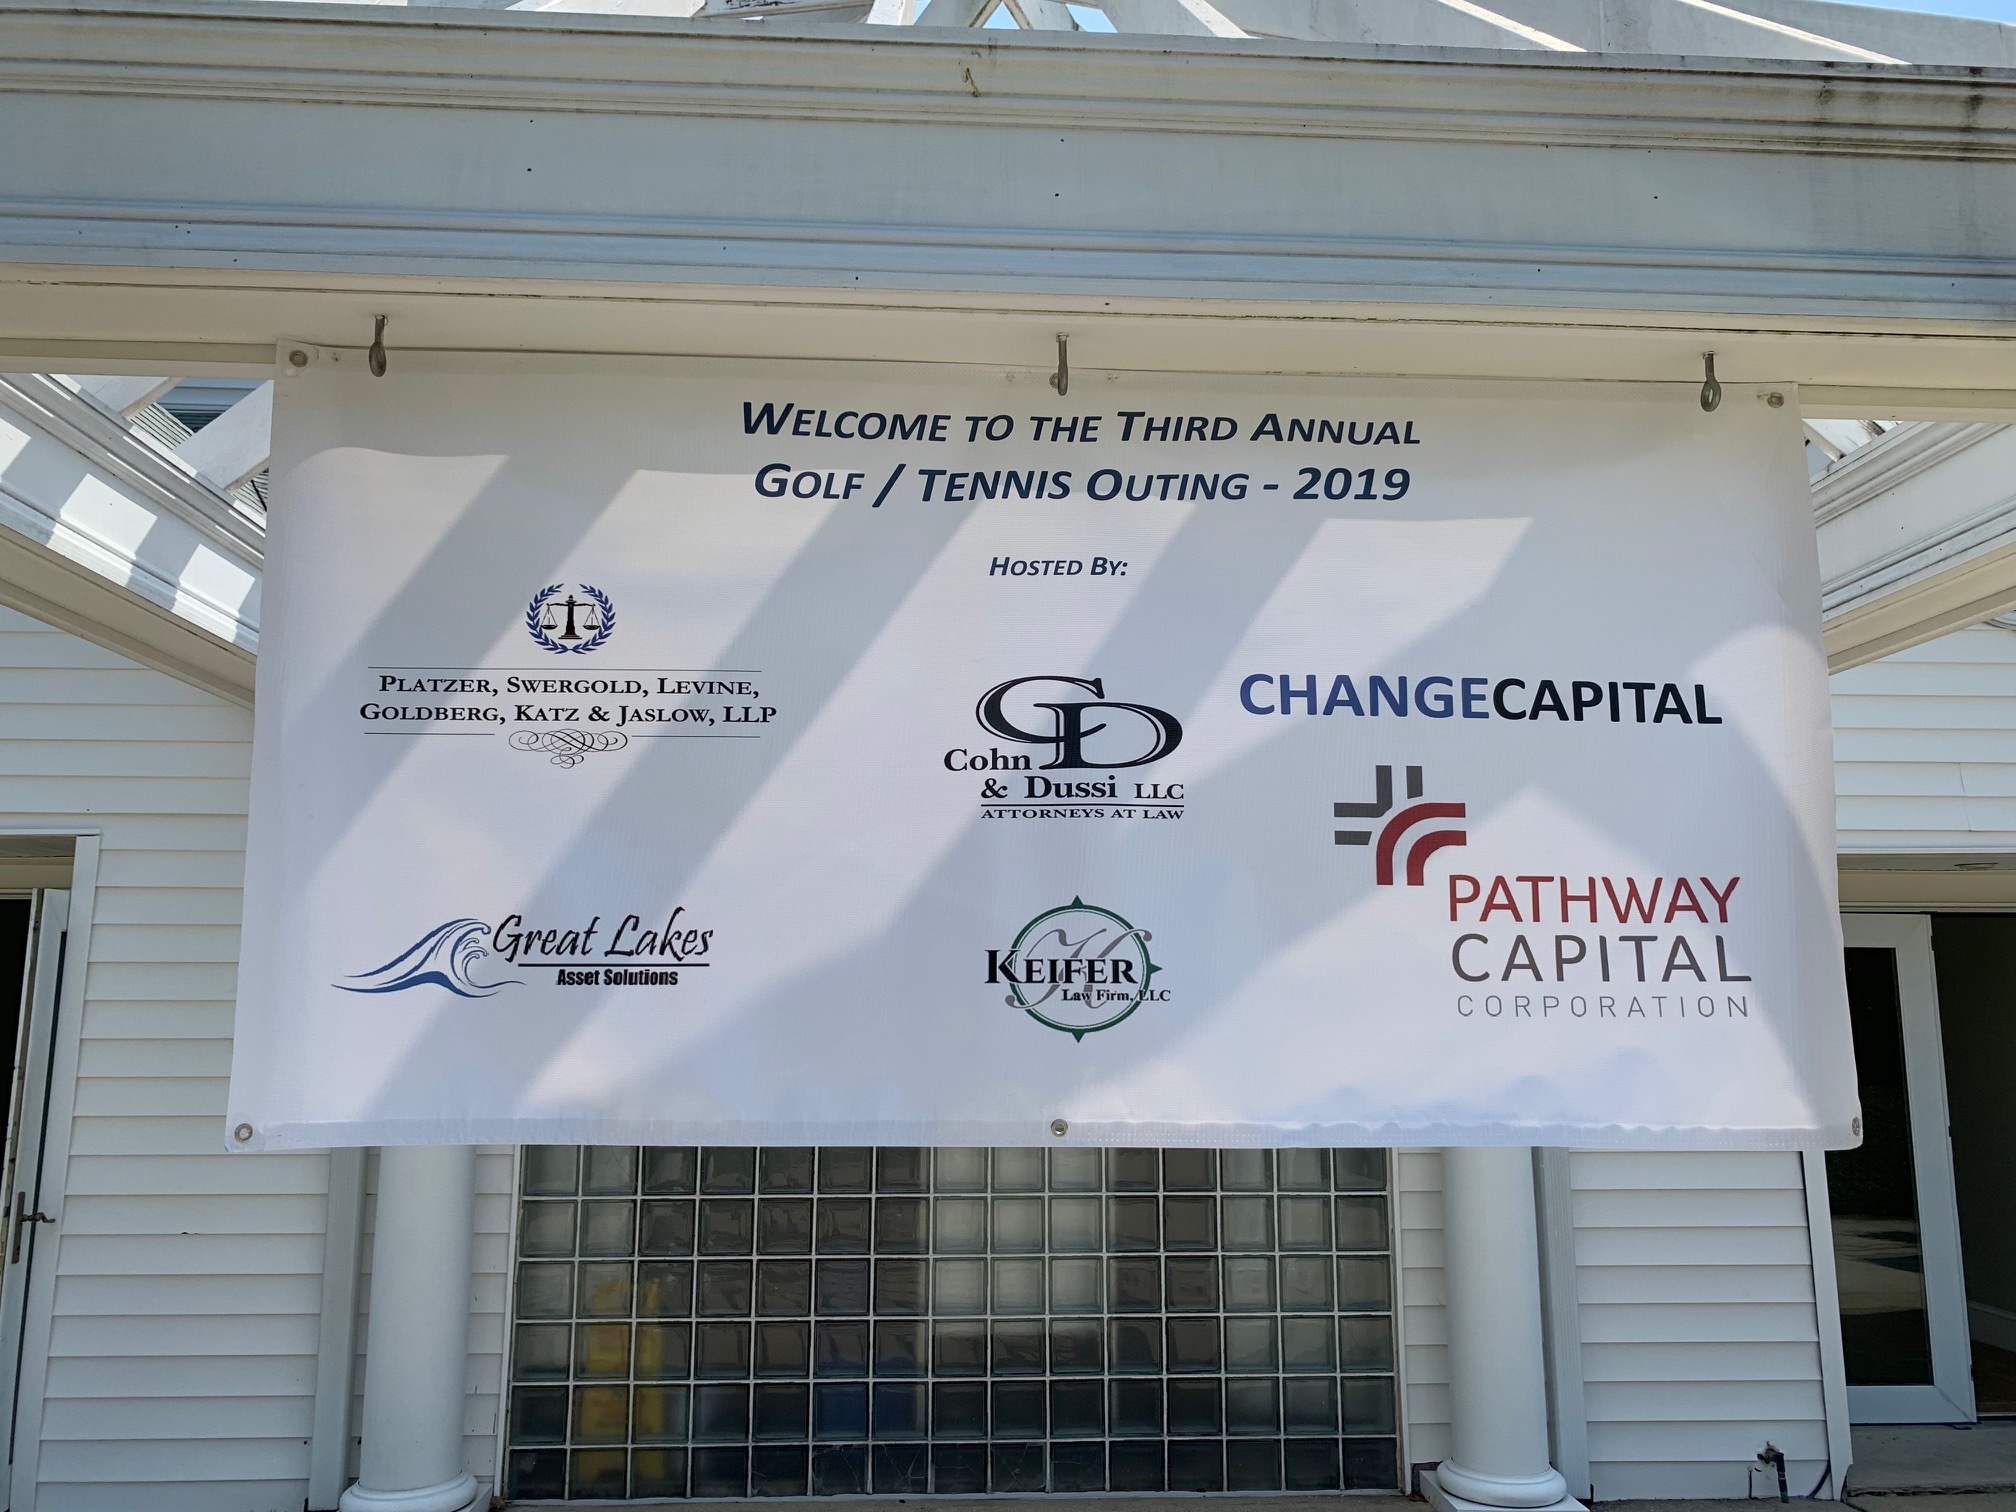 Welcome to the Third Annual Golf/Tennis Outing - 2019